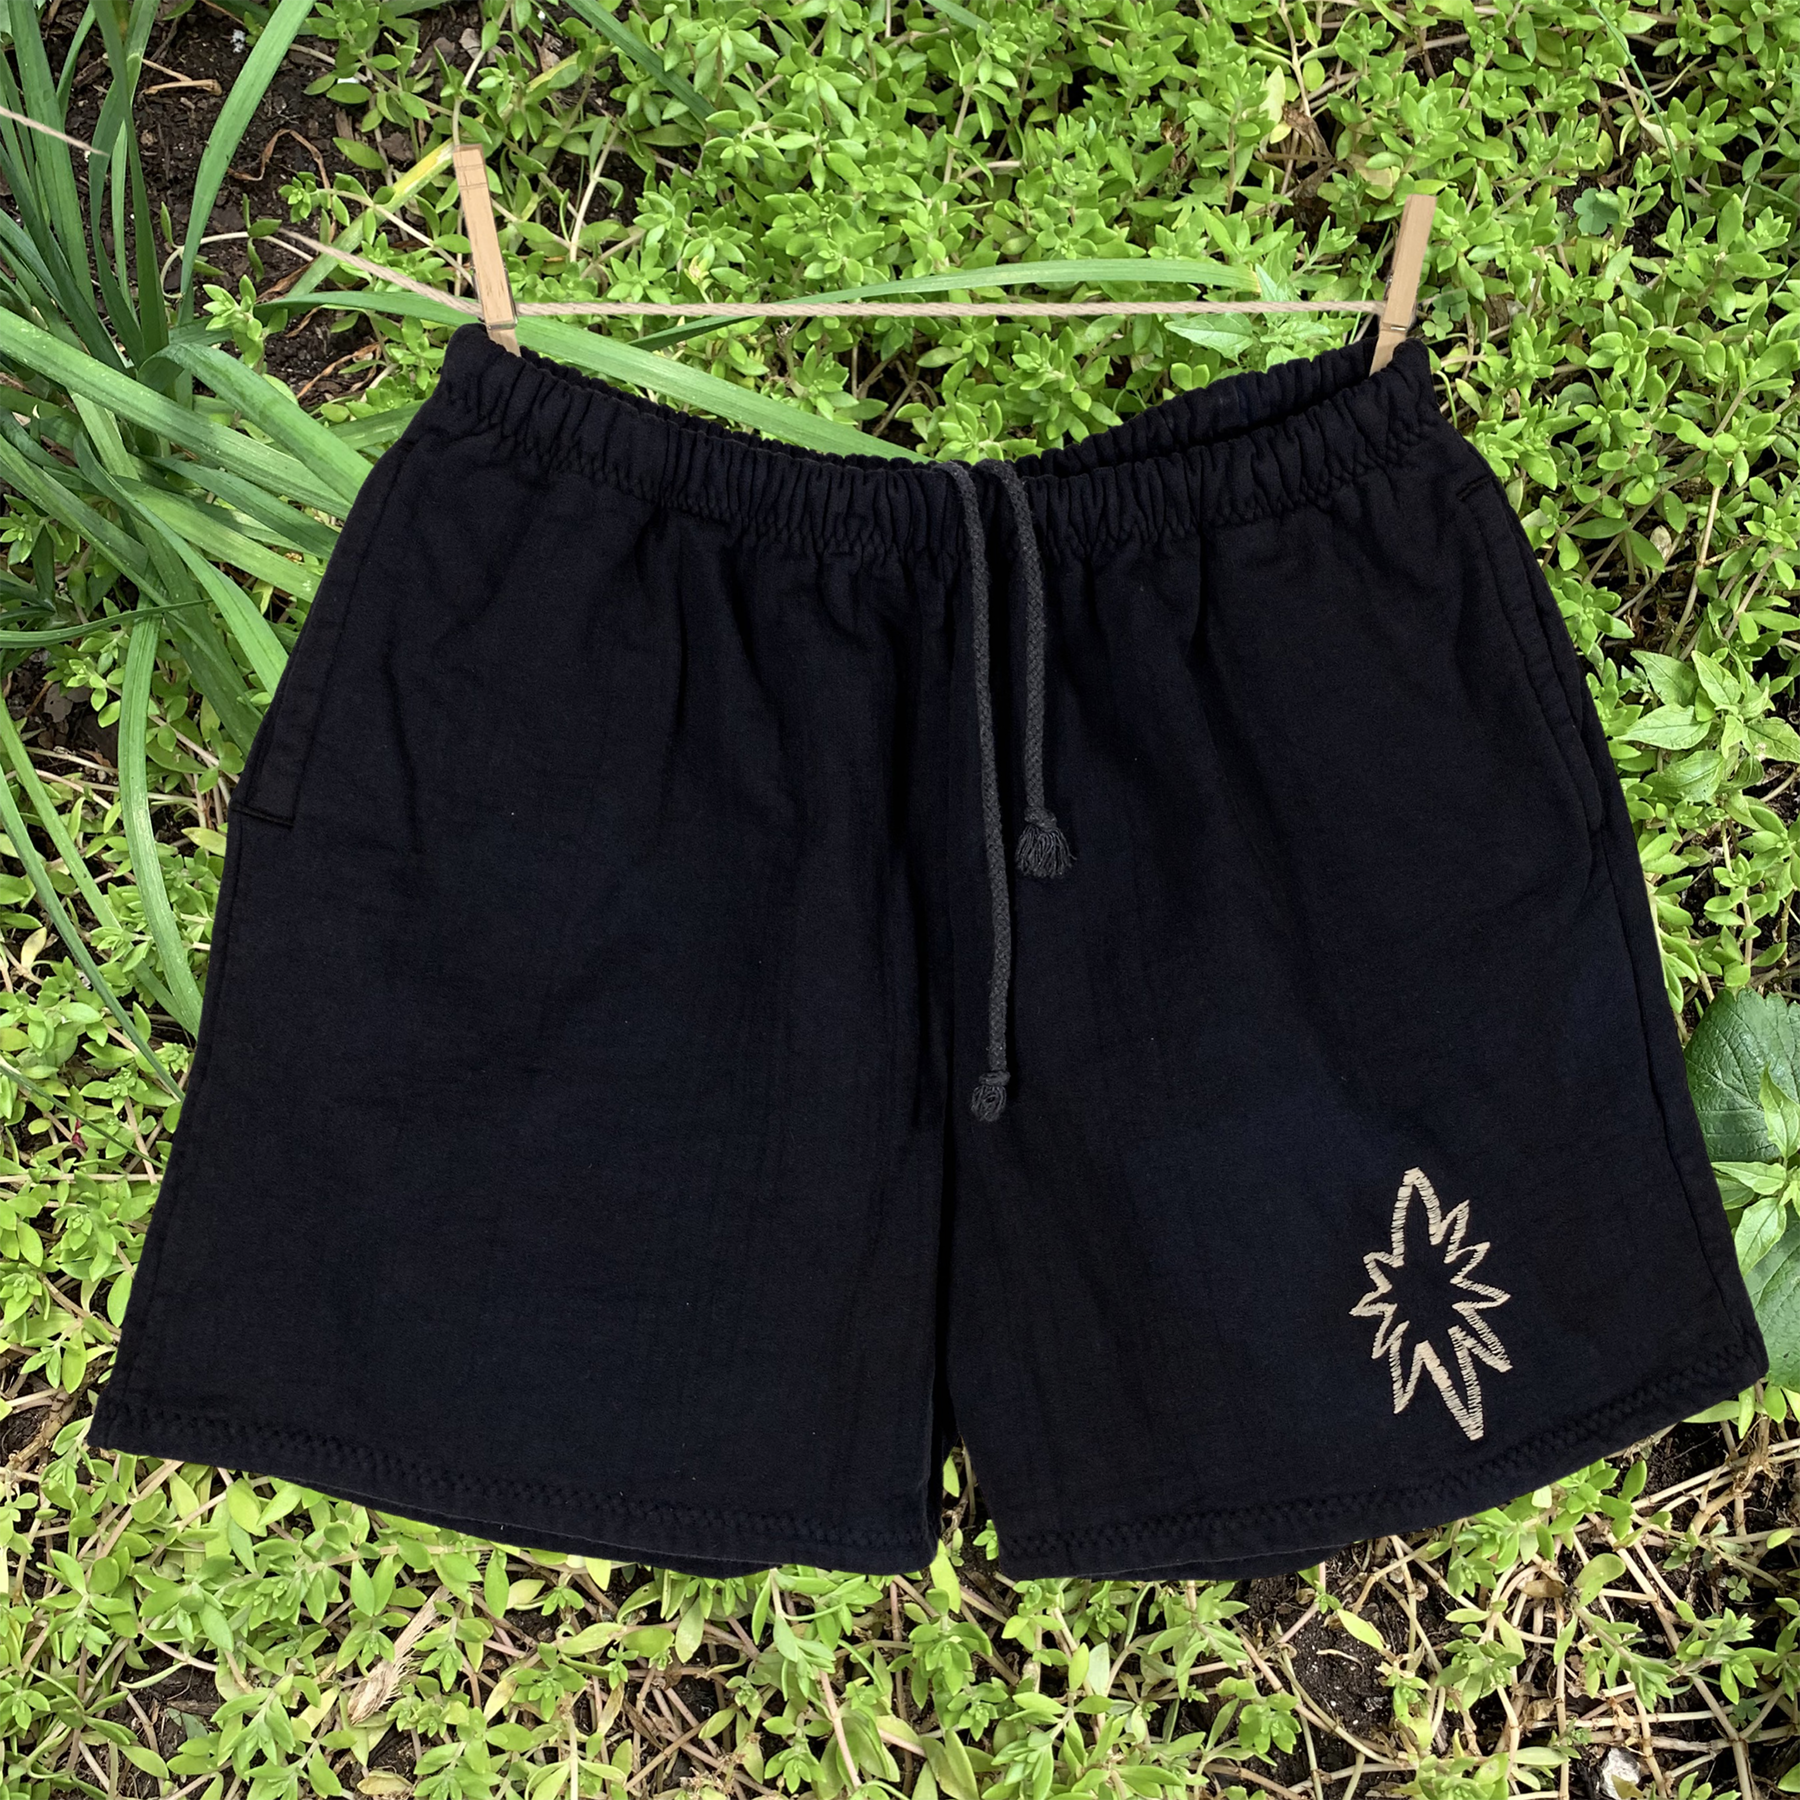 Home sewn embroidered shorts - XL